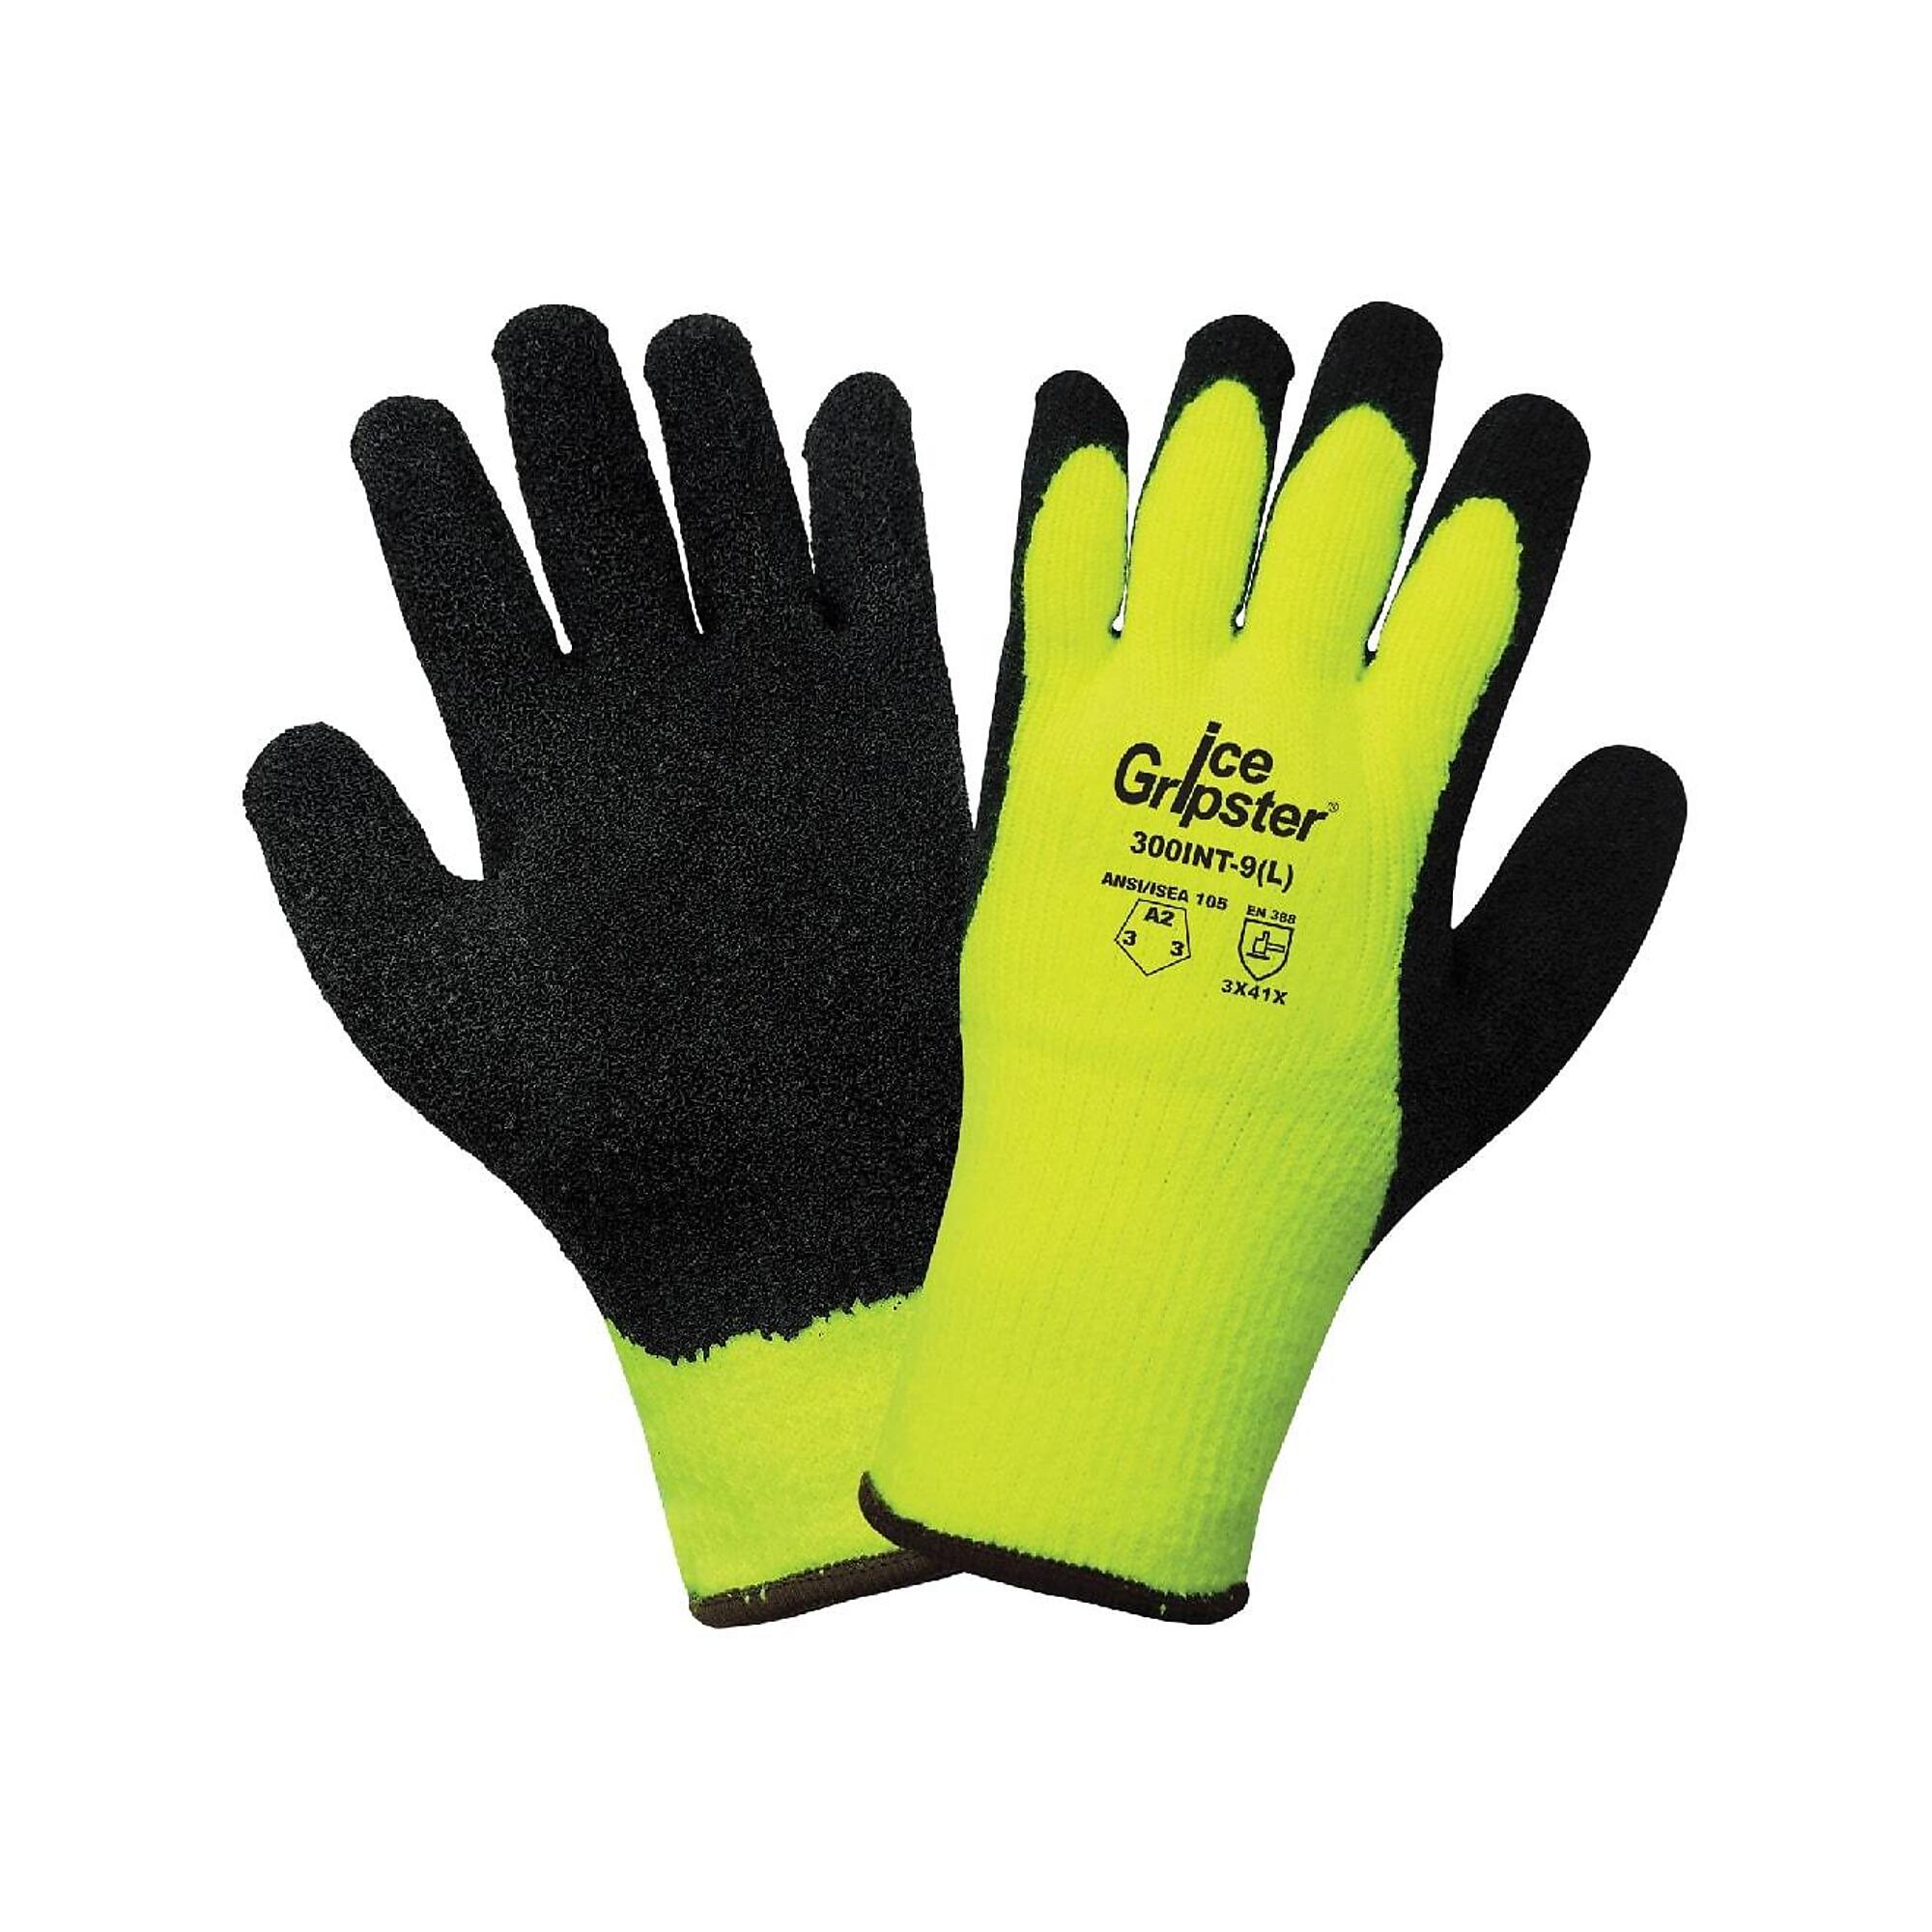 Global Glove Ice Gripster , HV Insulated, Wat-Resist, Rub Dip, Cut A2 Gloves - 12 Pairs, Size M, Color High-Visibility Yellow/Black, Included (qty.)